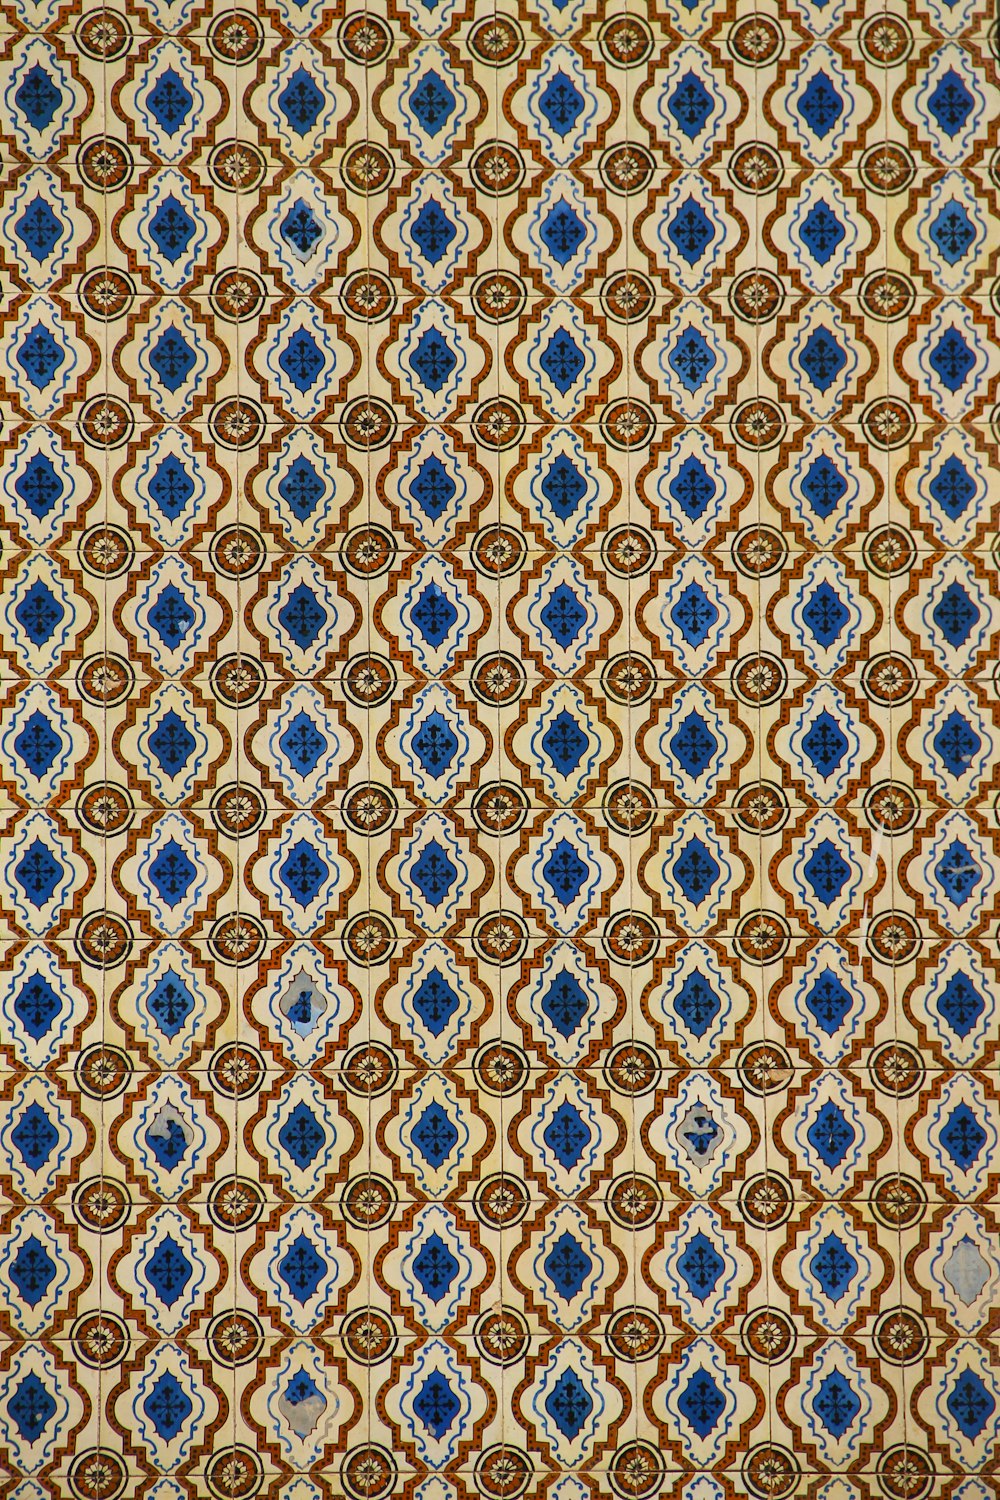 blue and white floral textile